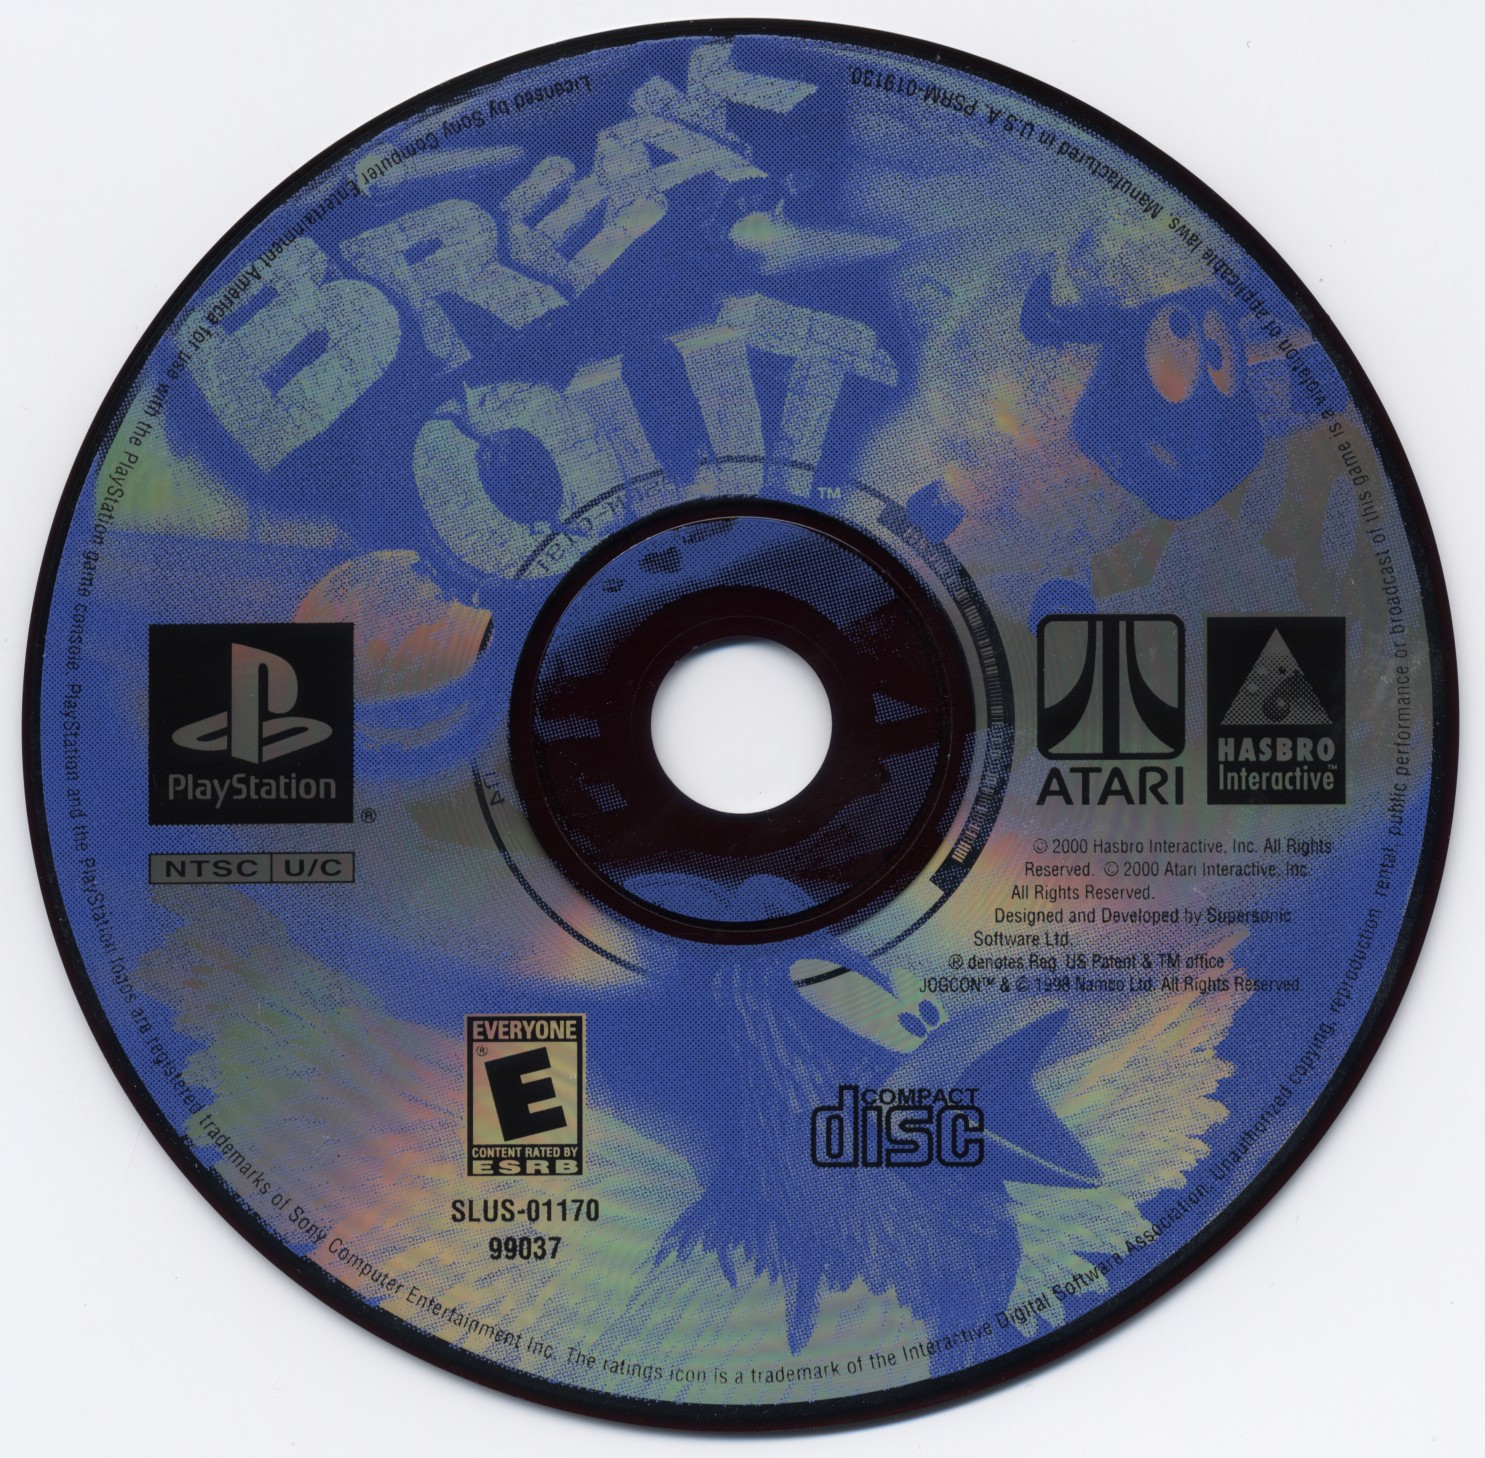 Breakout PSX cover